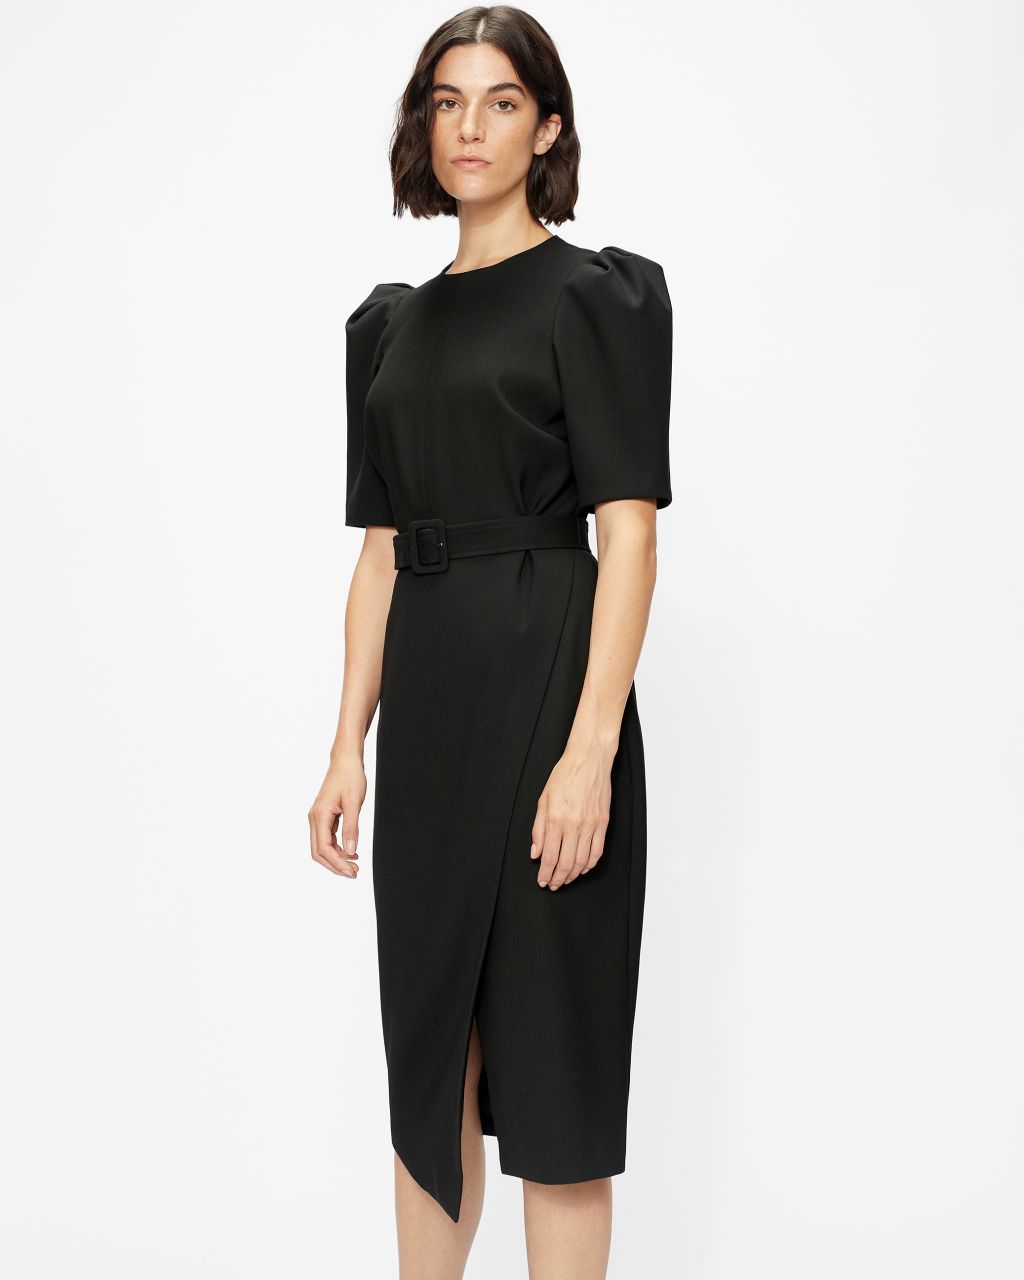 Tailored Dress With Exaggerated Shoulder